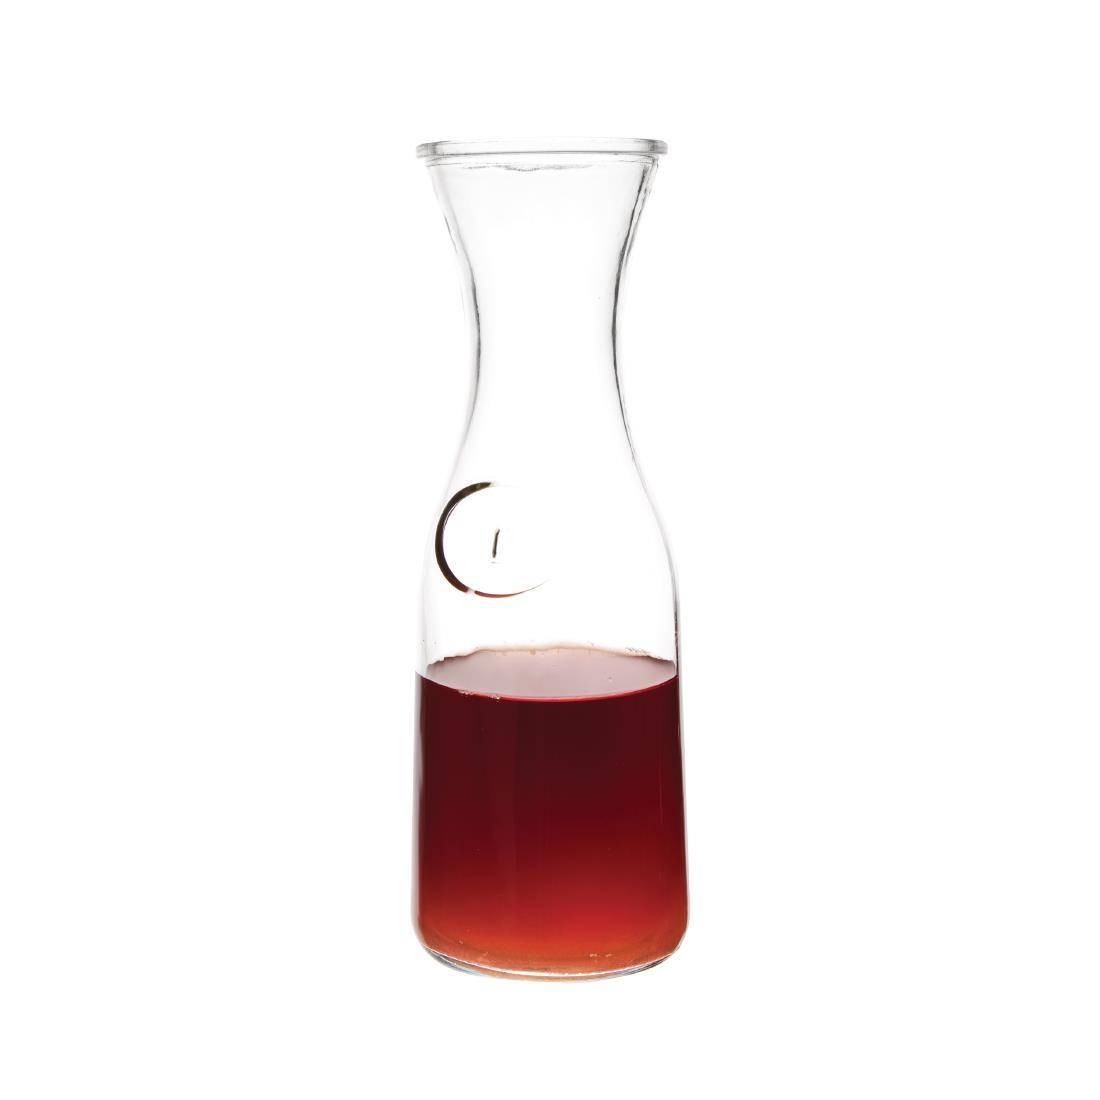 Olympia Glass Carafe 1Ltr (Pack of 6) - GG928  - 3